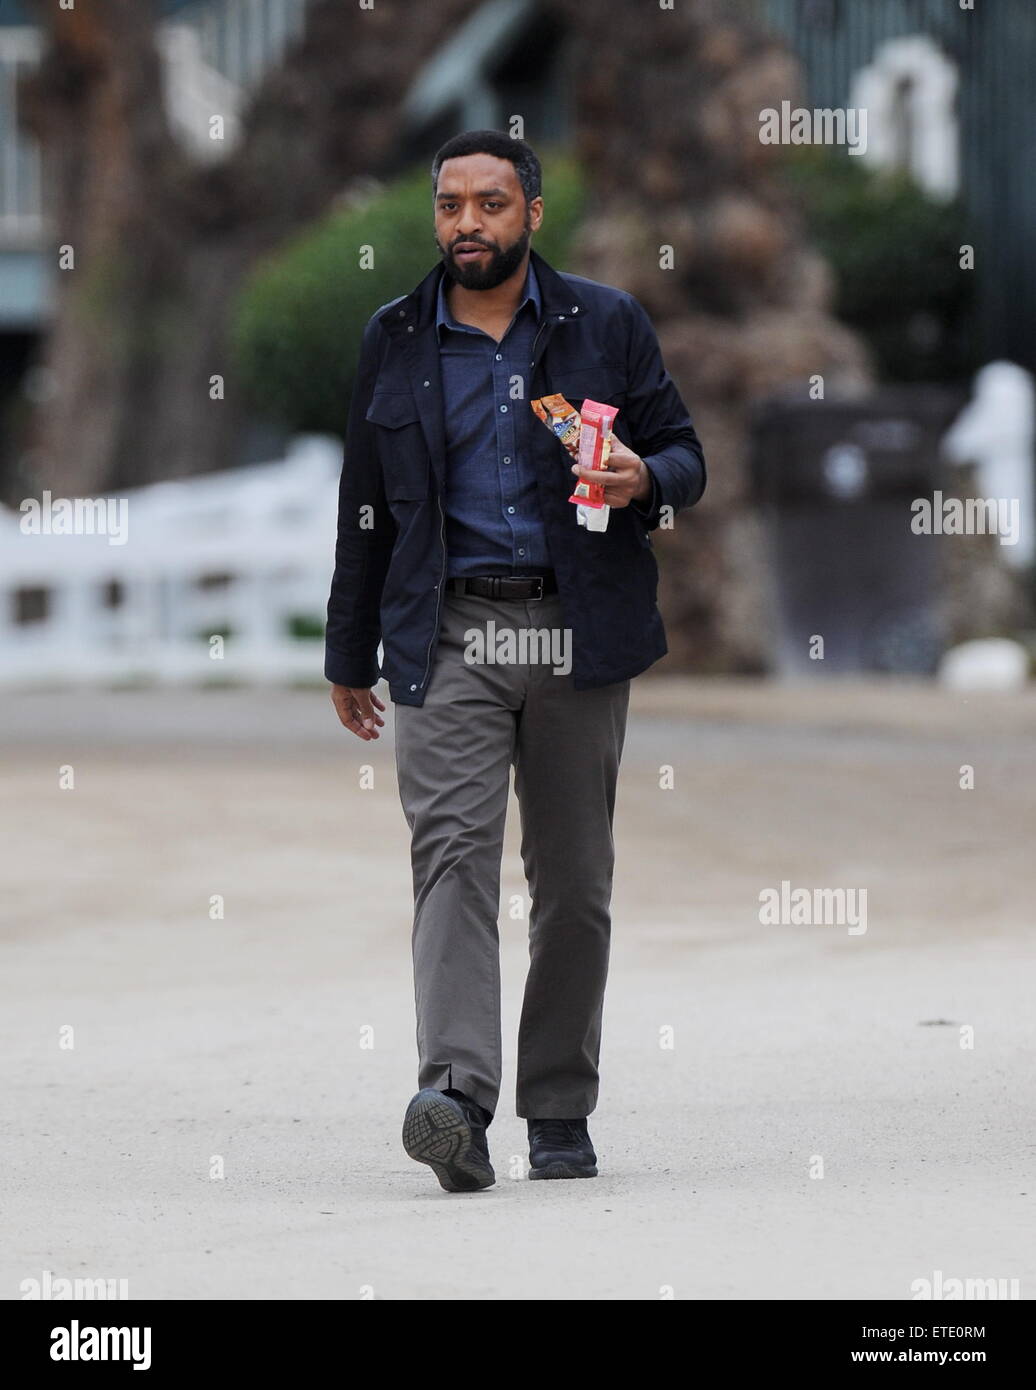 Oscar nominee '12 Years A Slave' star Chiwetel Ejiofor spotted on the set of 'The Secret In Their Eyes' filming in Pasadena Ca. The actor was joined by co star Dean Norris from 'Breaking Bad' and Daniel Moder as the cinematographer for the film. Daniel's famous wife Julia Roberts is also casted for the film.  Featuring: Chiwetel Ejiofo Where: Pasadena, California, United States When: 28 Jan 2015 Credit: Cousart/JFXimages/WENN.com Stock Photo